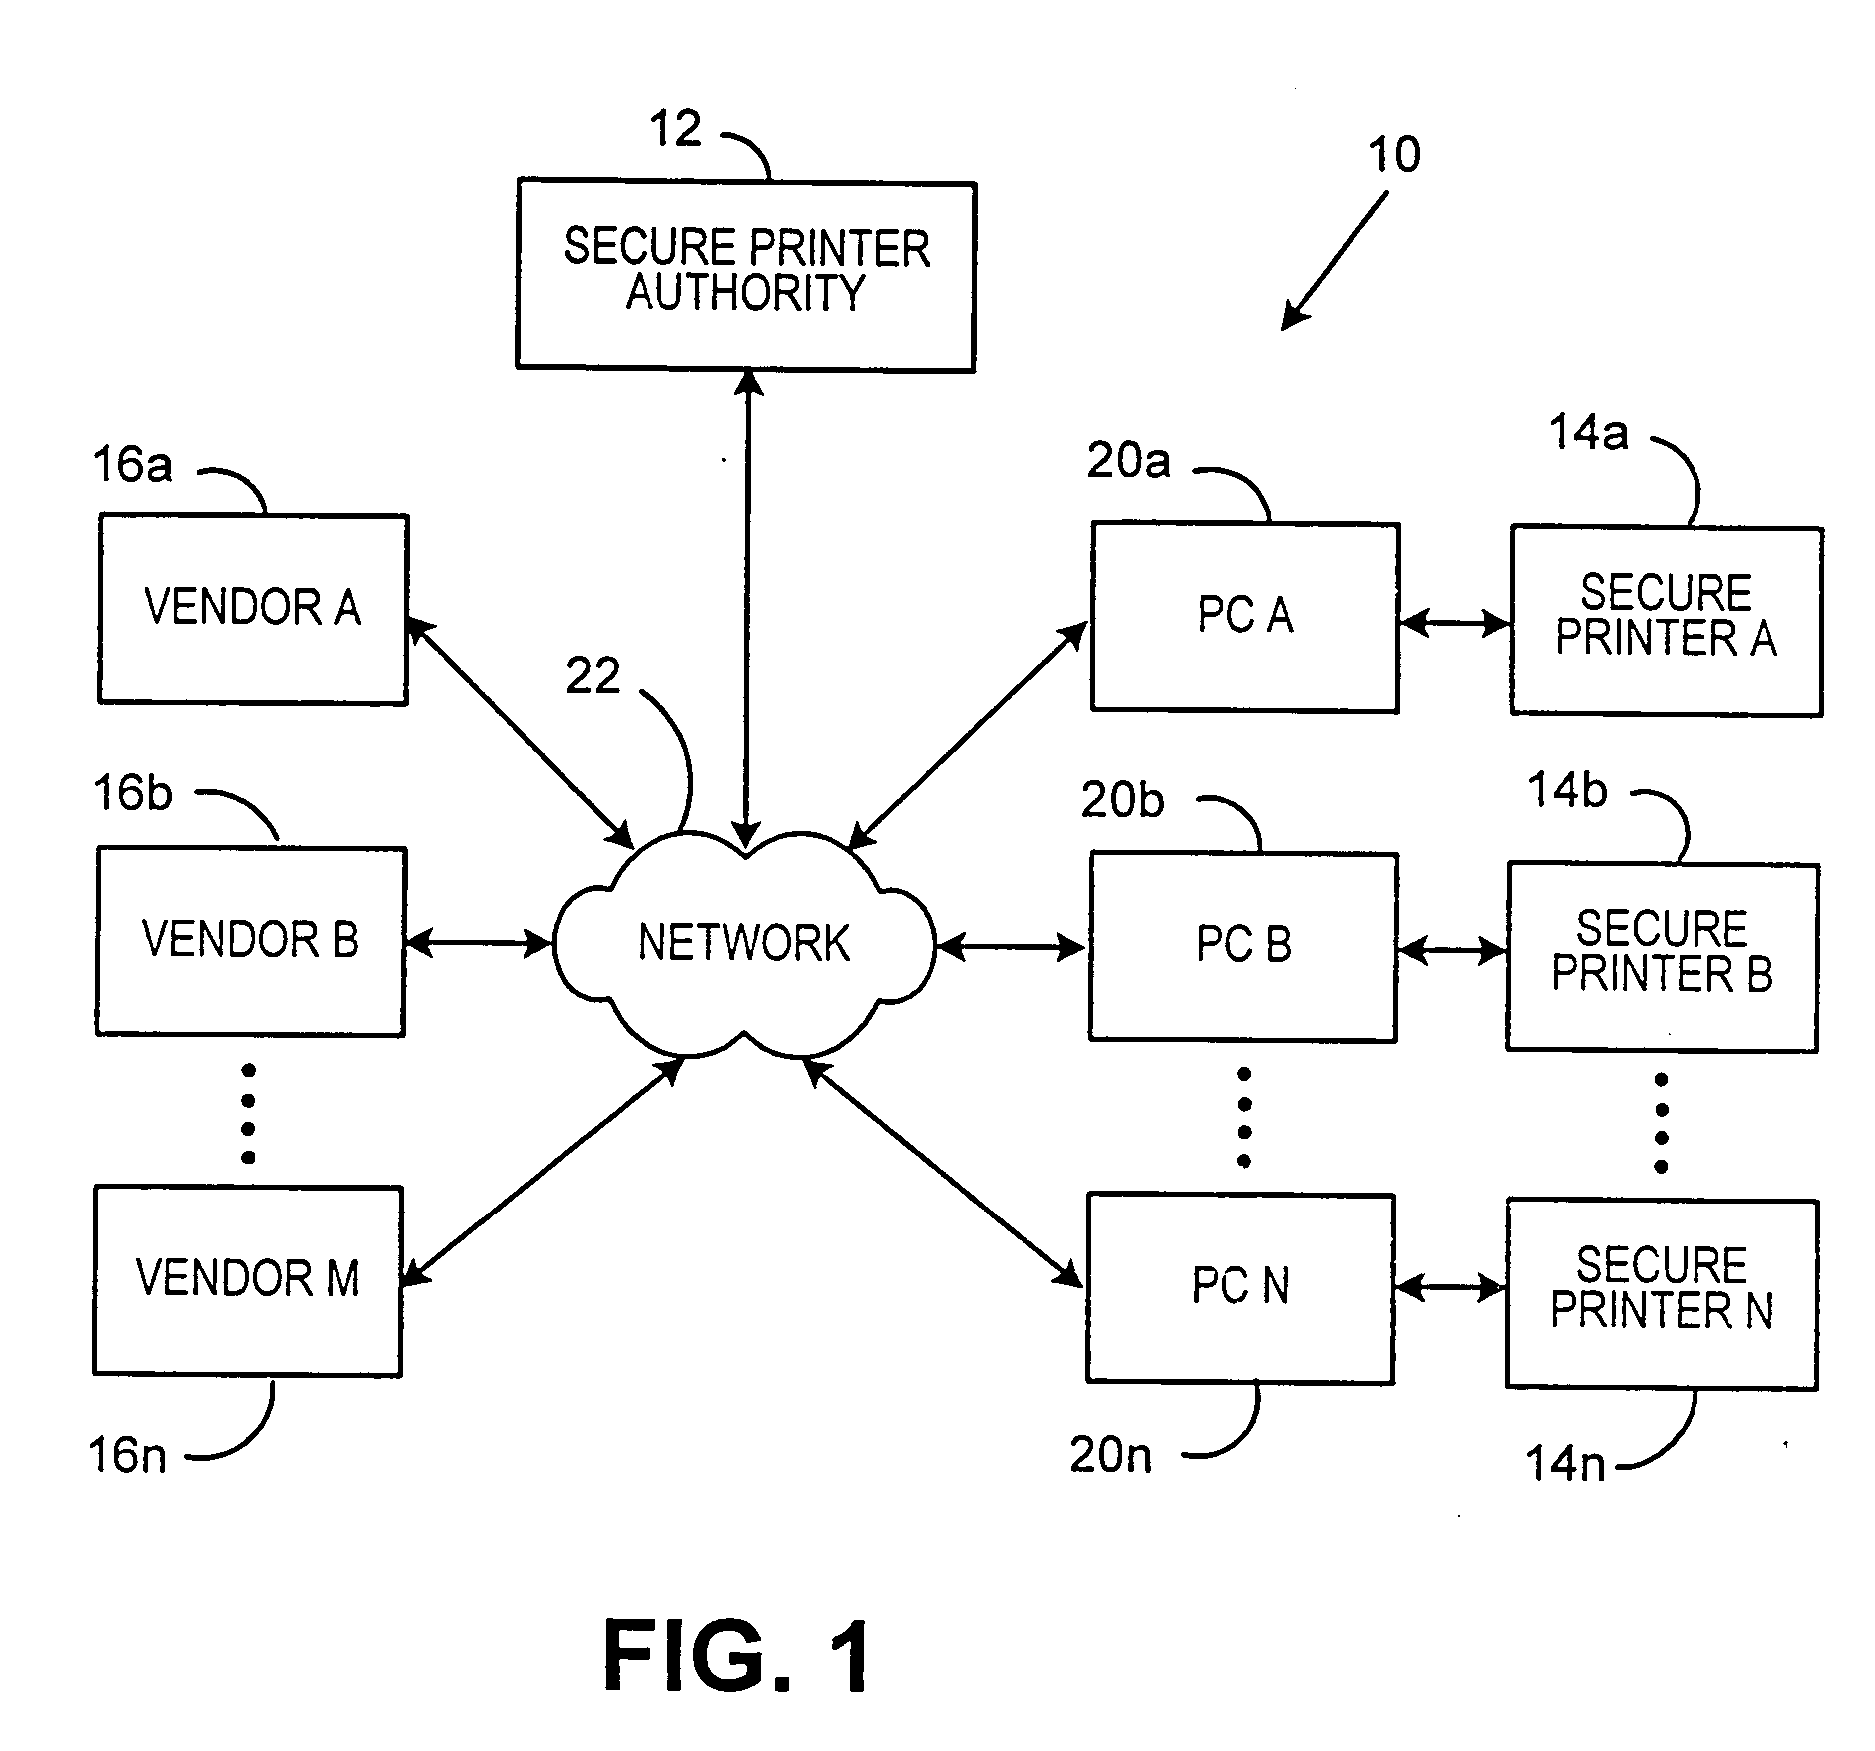 Method and system for printing transaction documents using a multi-vendor secure printer under control of a printer authority